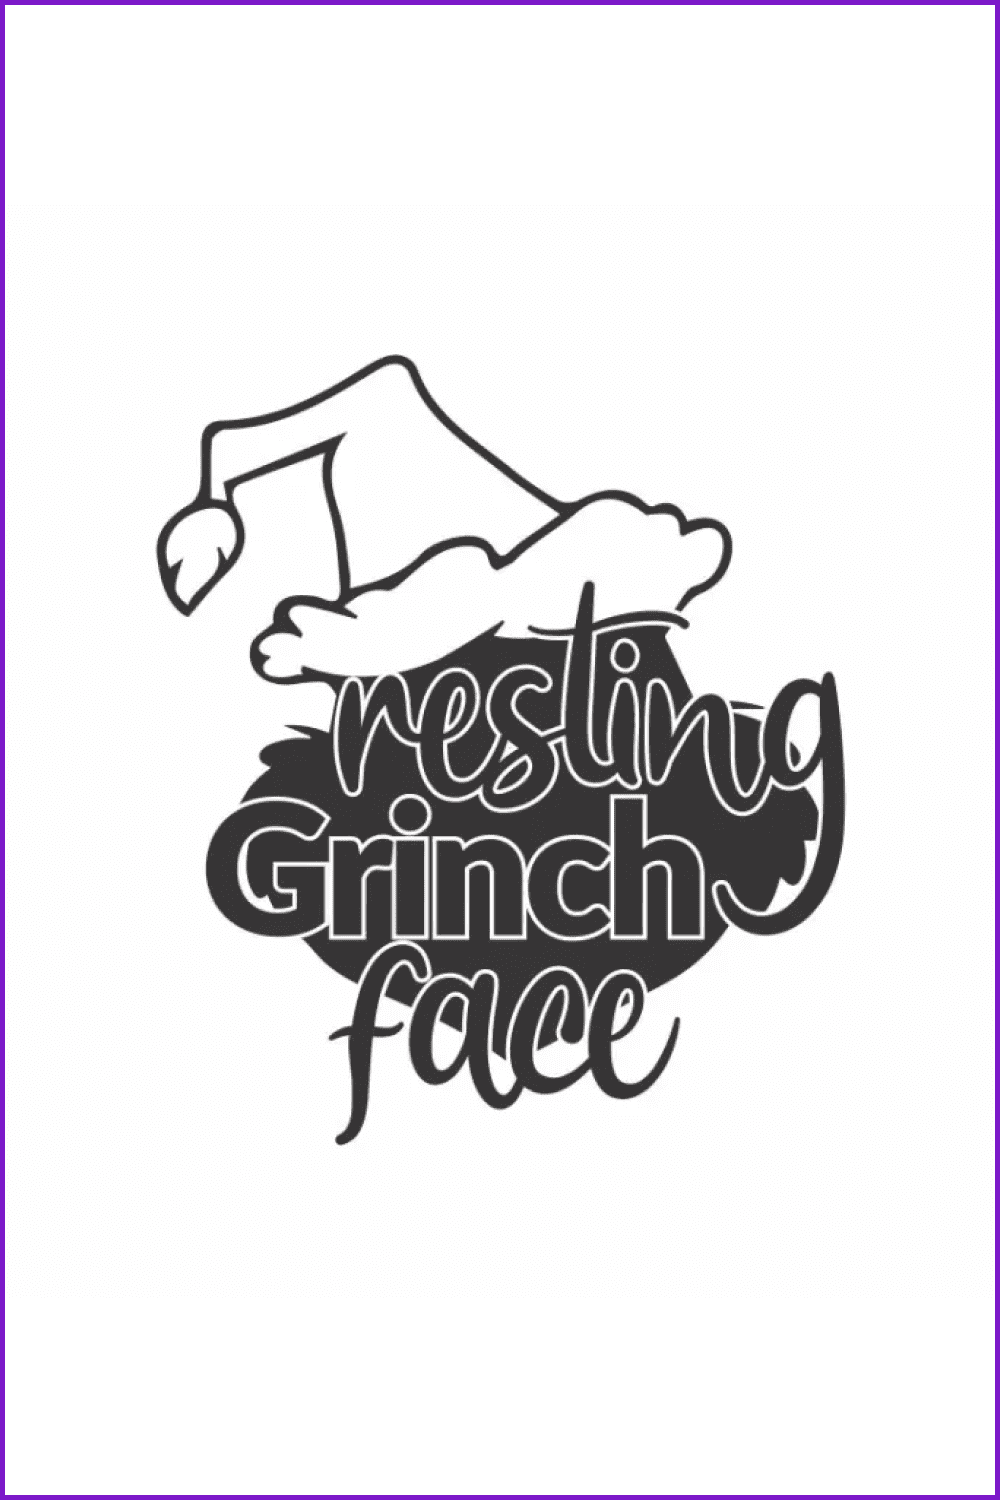 Free Resting Grinch Face SVG Cut File.